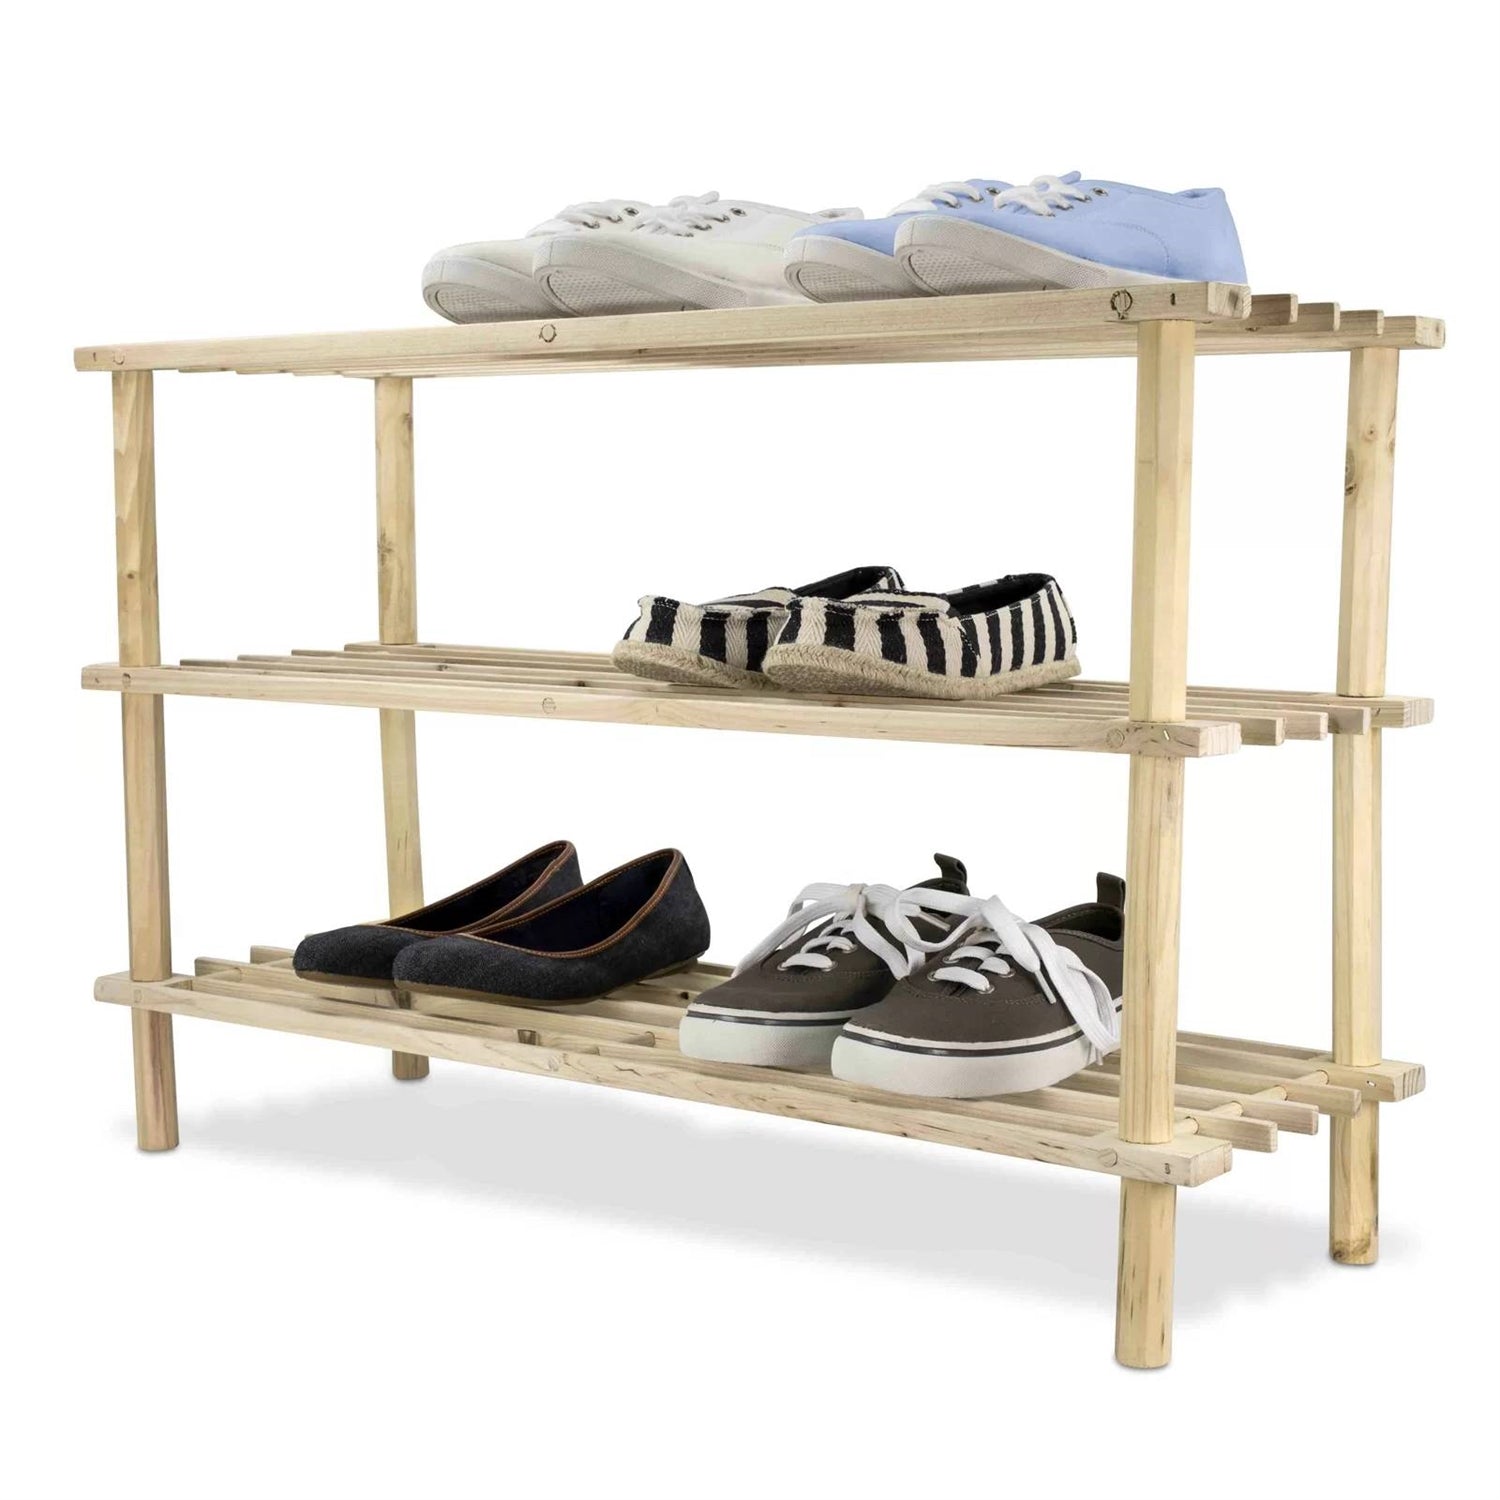 Solid Pine Wood 3-Tier Shoe Rack - Holds up to 12 Pair of Shoes